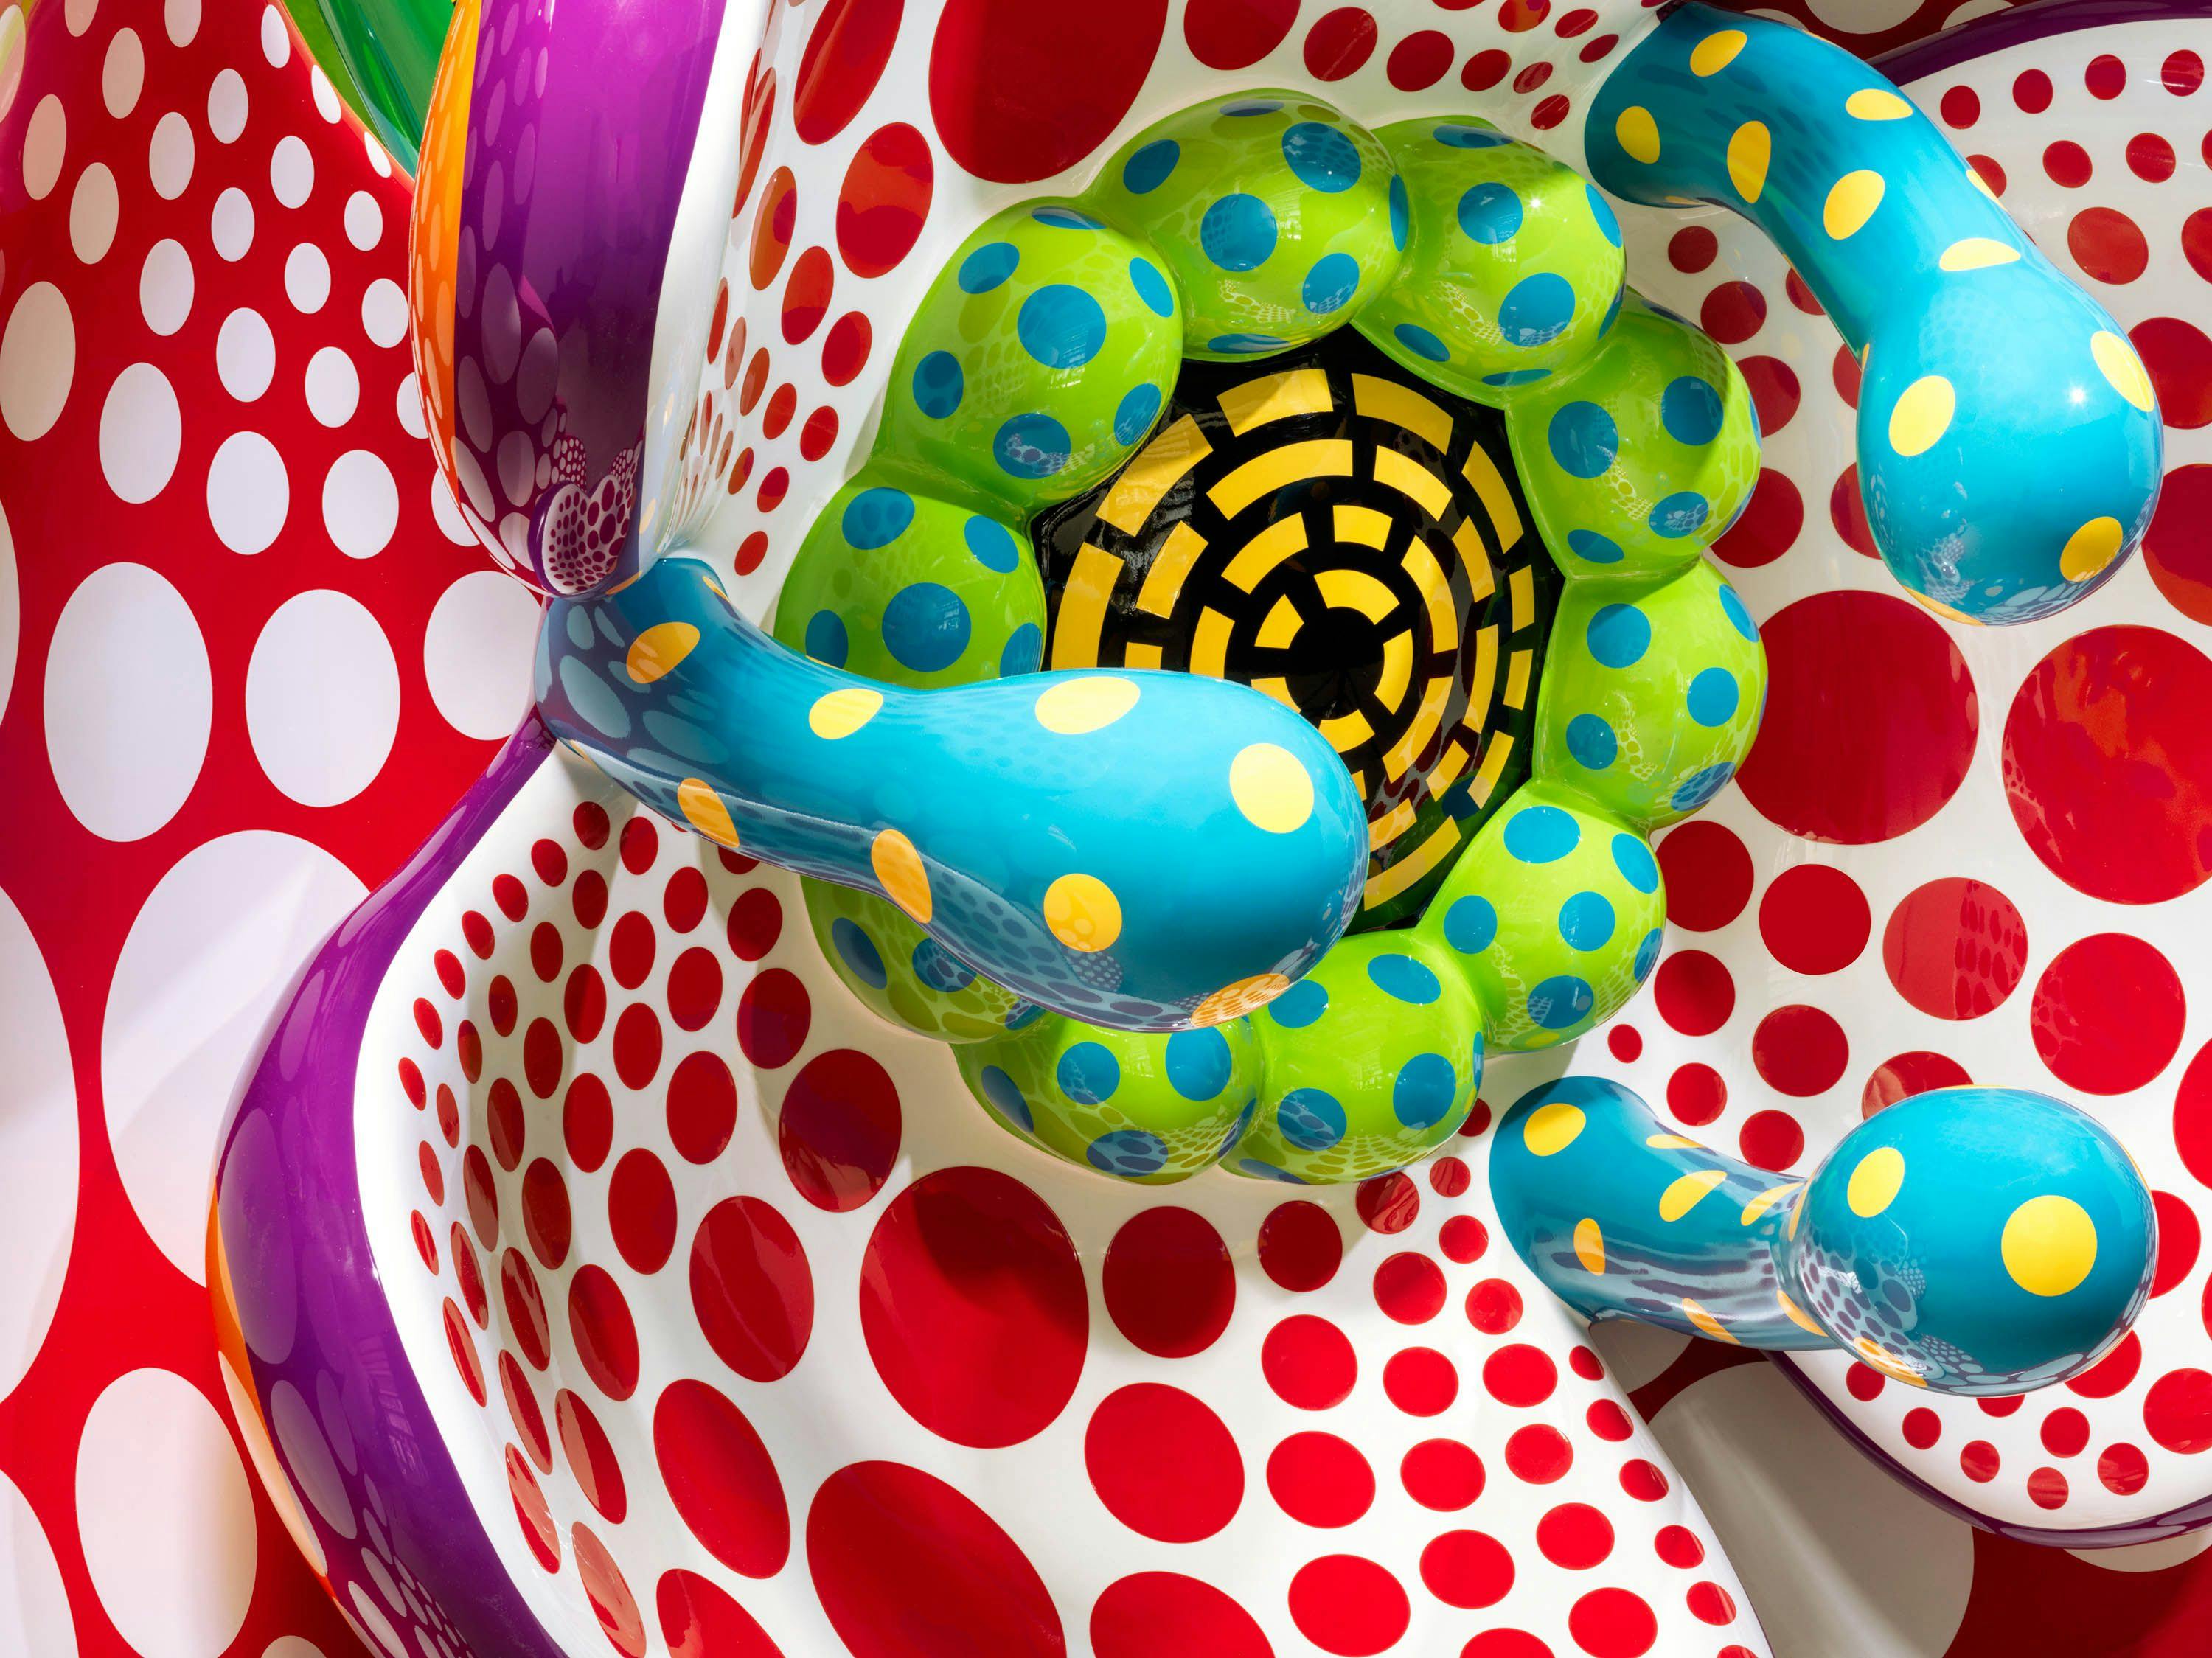 A detail from a sculpture by Yayoi Kusama, titled I Spend Each Day Embracing Flowers, dated 2023.